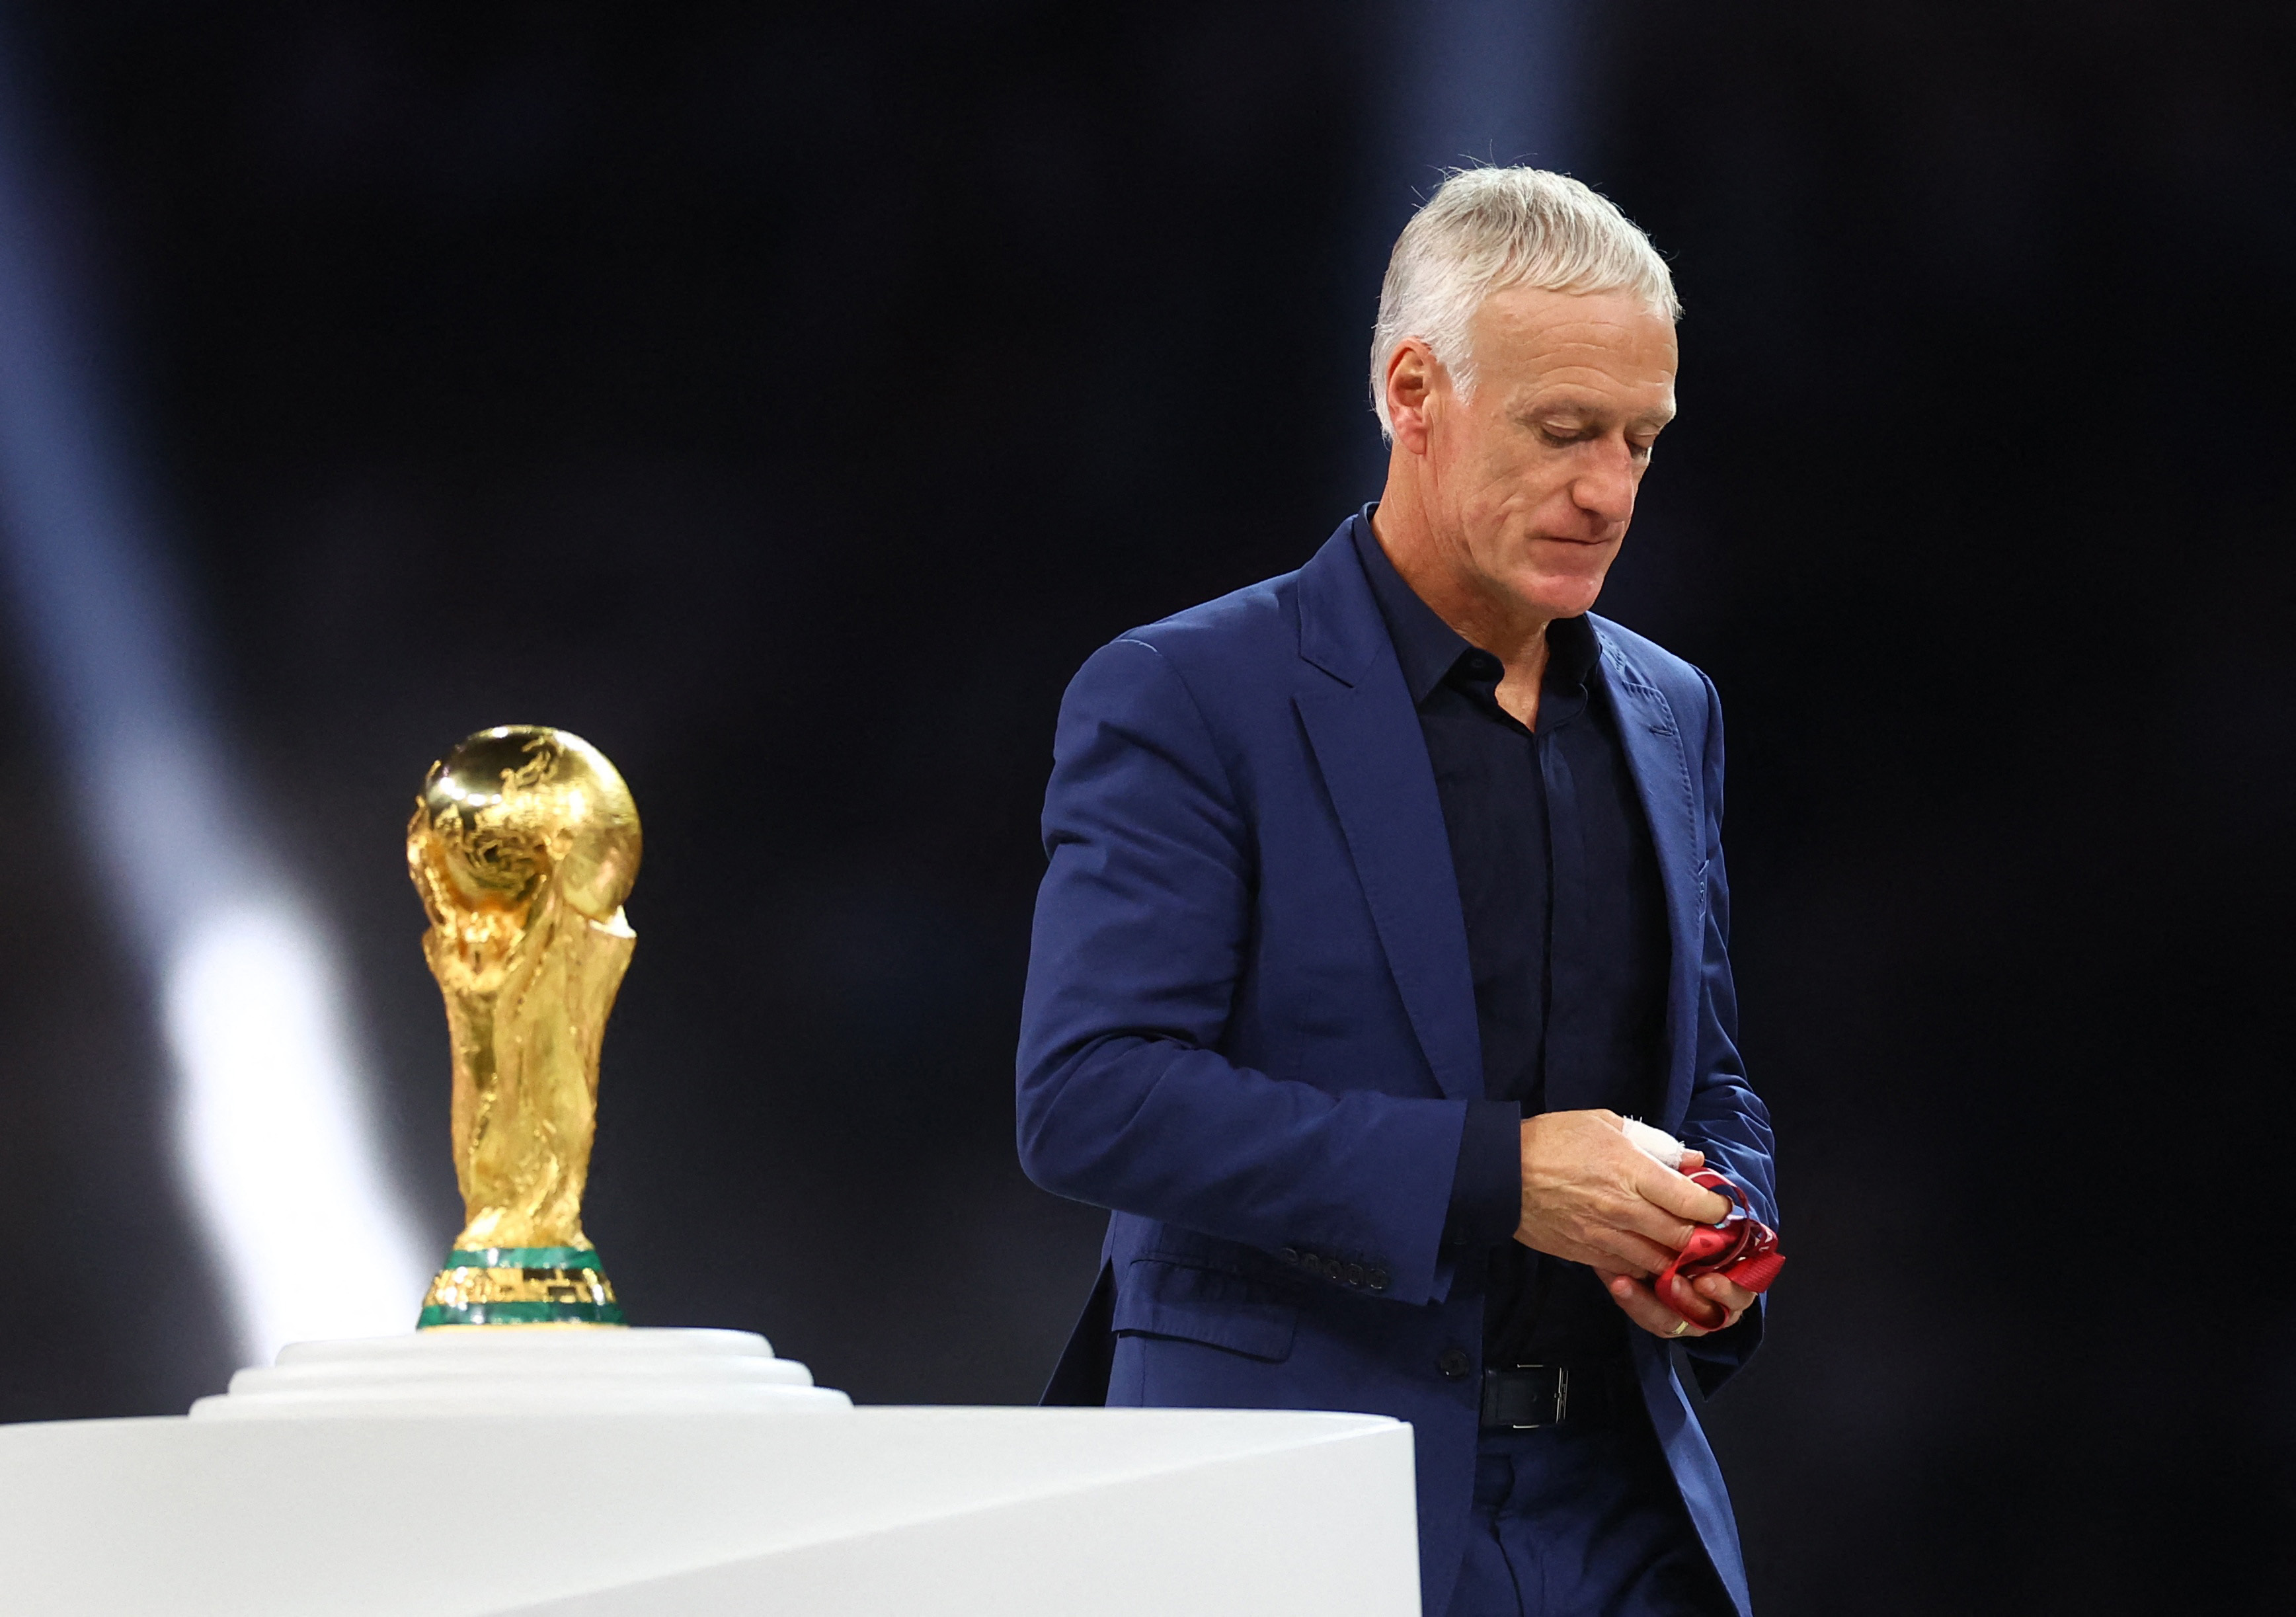 Soccer Football - FIFA World Cup Qatar 2022 - Final - Argentina v France - Lusail Stadium, Lusail, Qatar - December 18, 2022 France coach Didier Deschamps looks dejected as he walks past the World Cup trophy during the ceremony after the match REUTERS/Kai Pfaffenbach